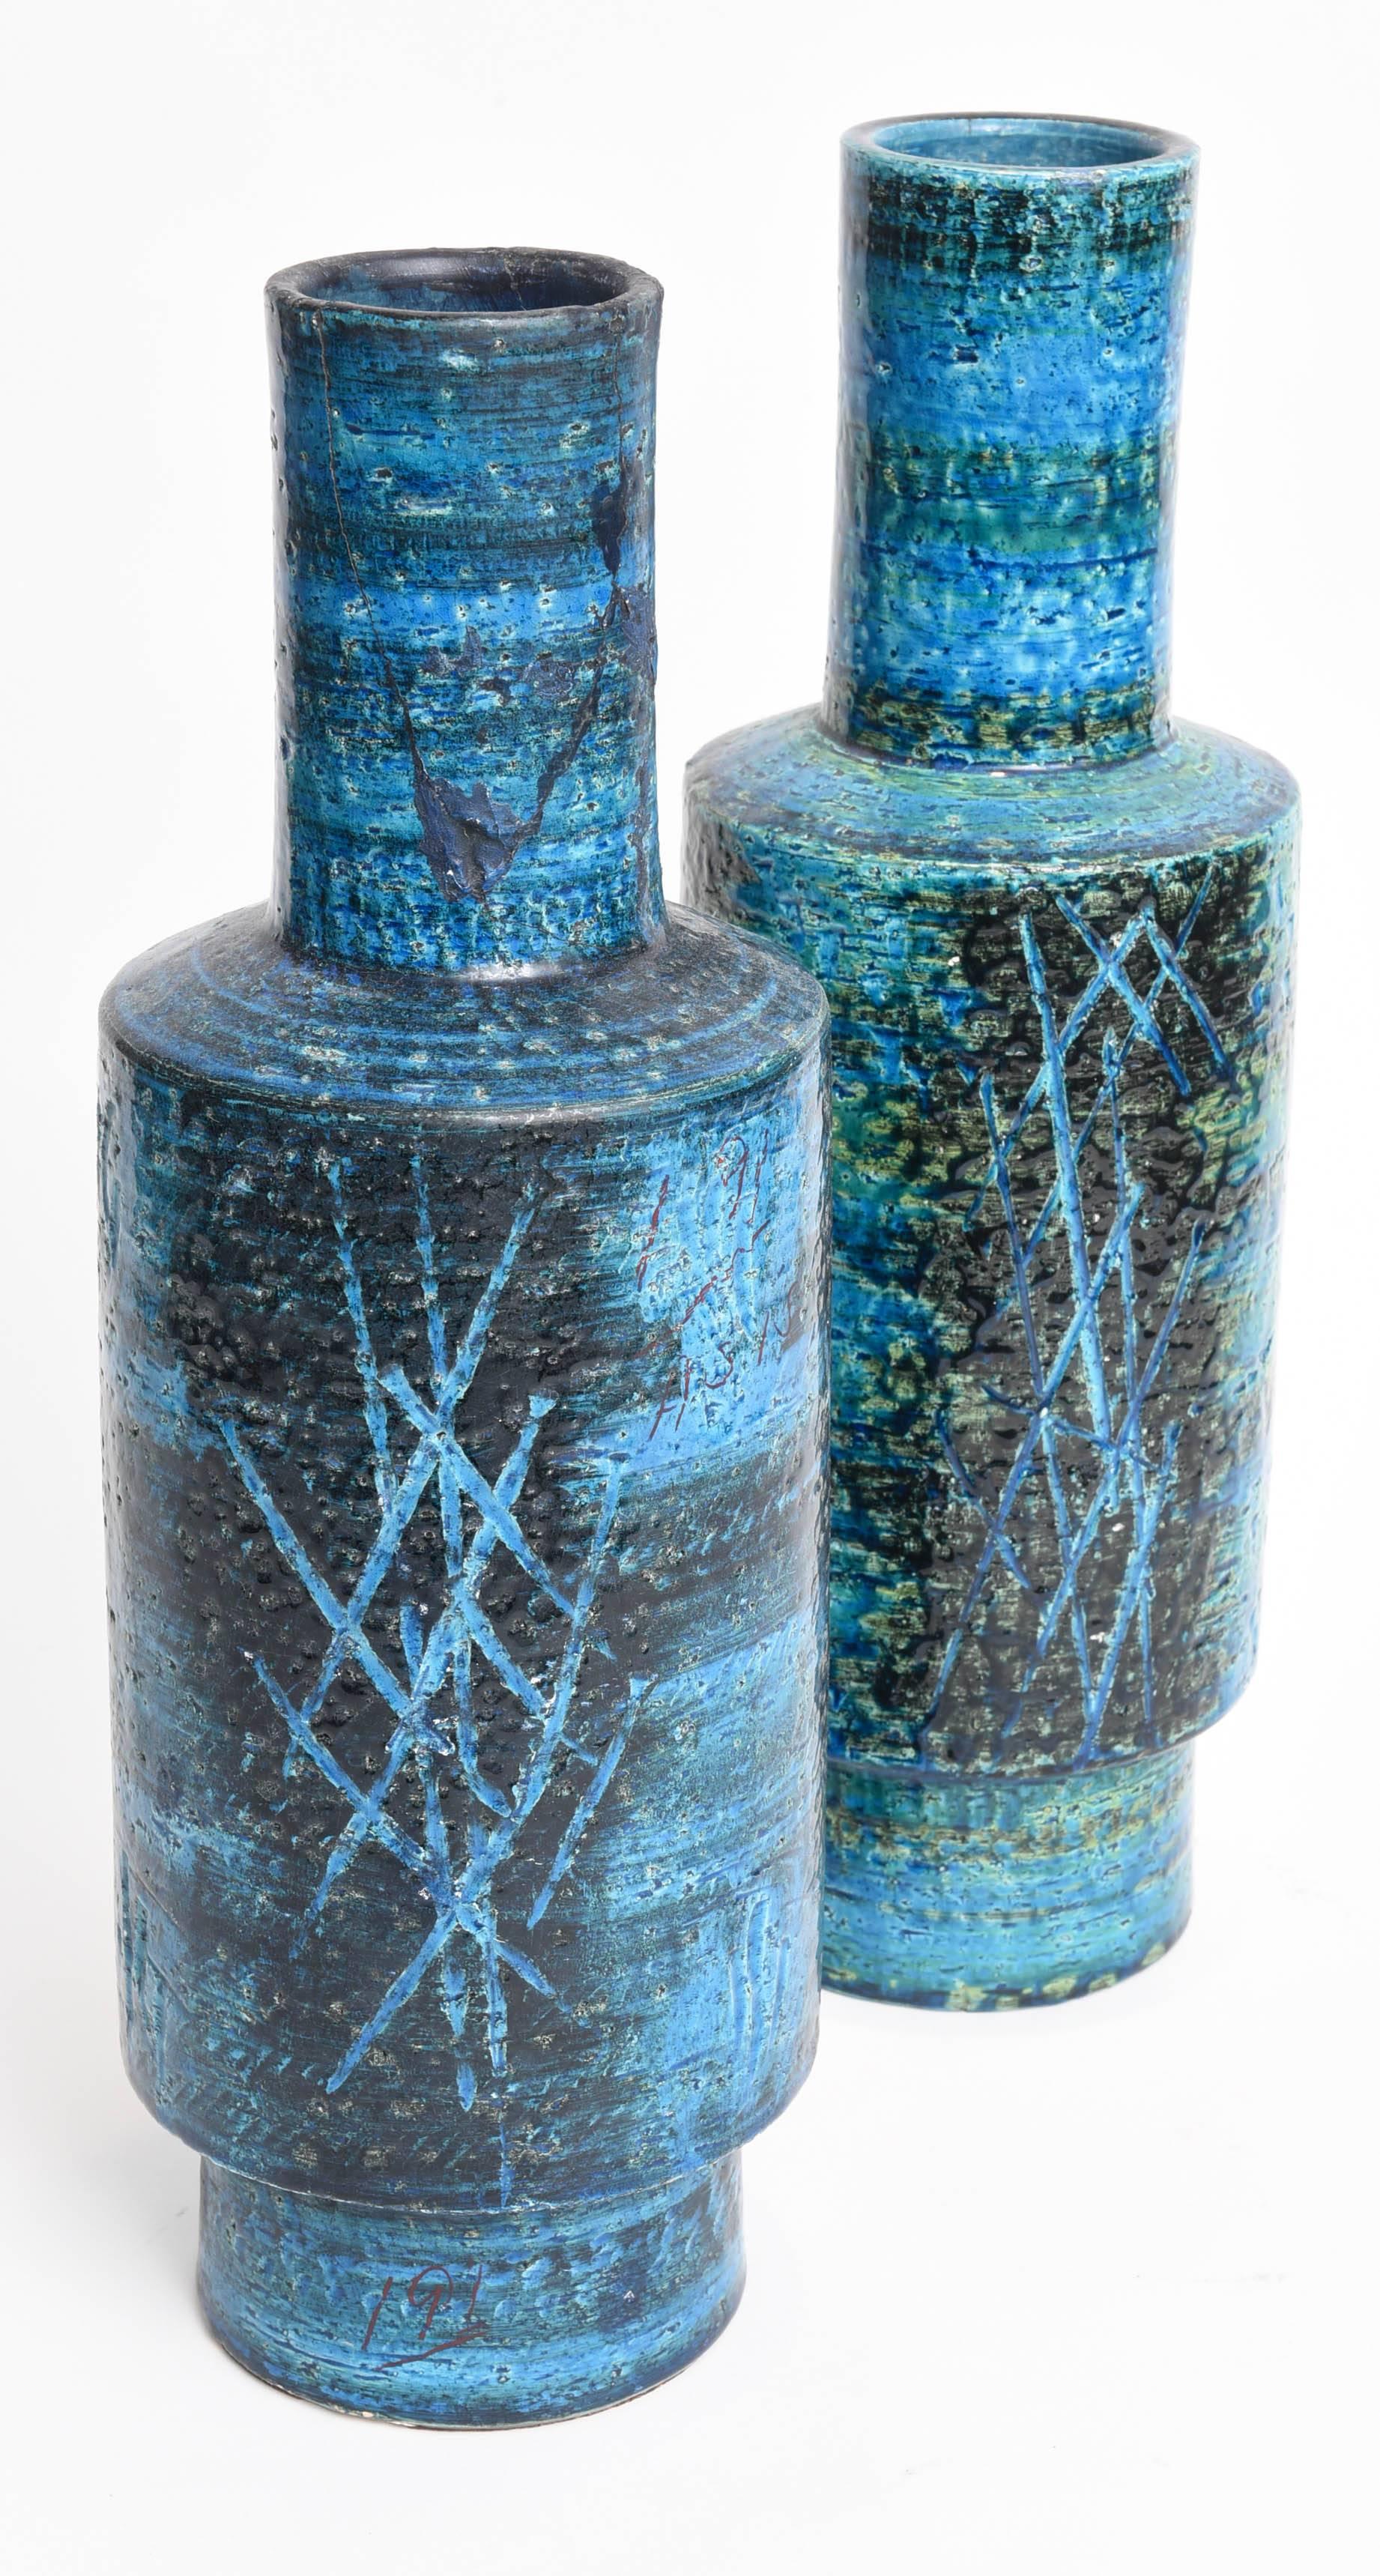 Rare pair of Rimini blue brutalist style blue vases by Bitossi designed by Aldo Londi for Raymor in his signature sgraffito style with paper label on bottom.  These were imported by Raymor and Rosenthal for the United States market in the